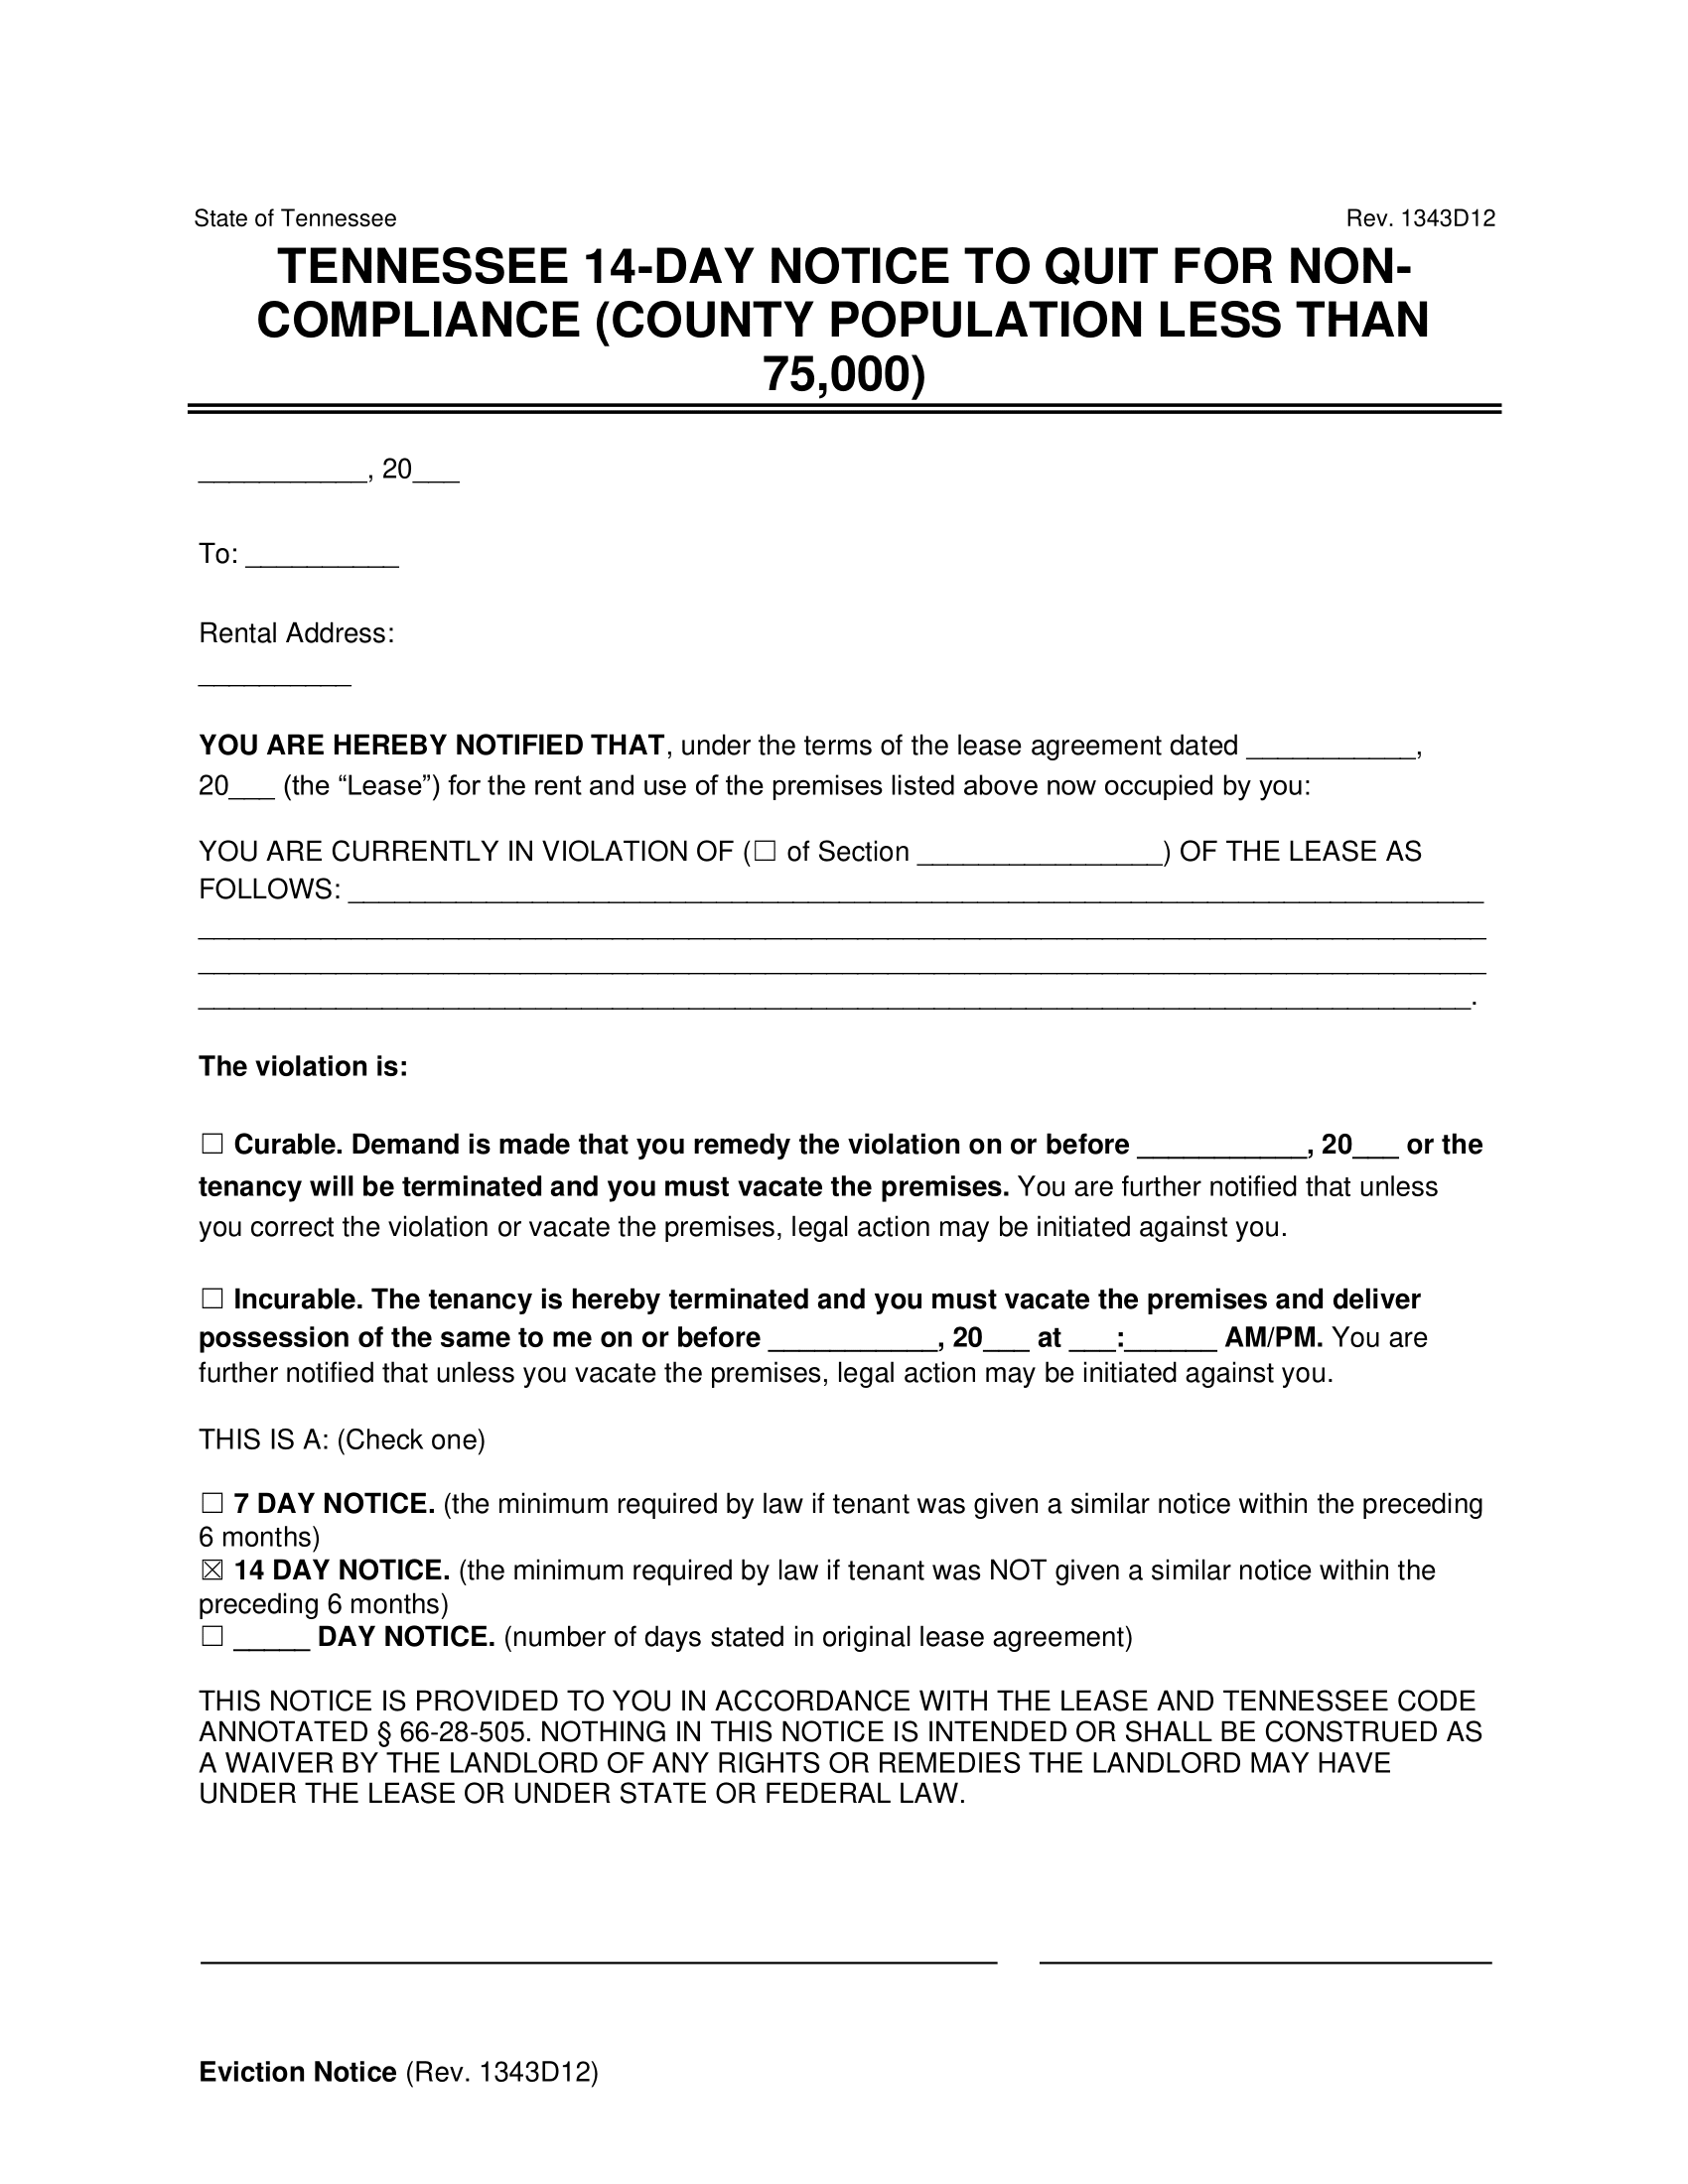 Tennessee 14-Day Notice to Quit for Non-Compliance (County Pop Less Than 75,000)